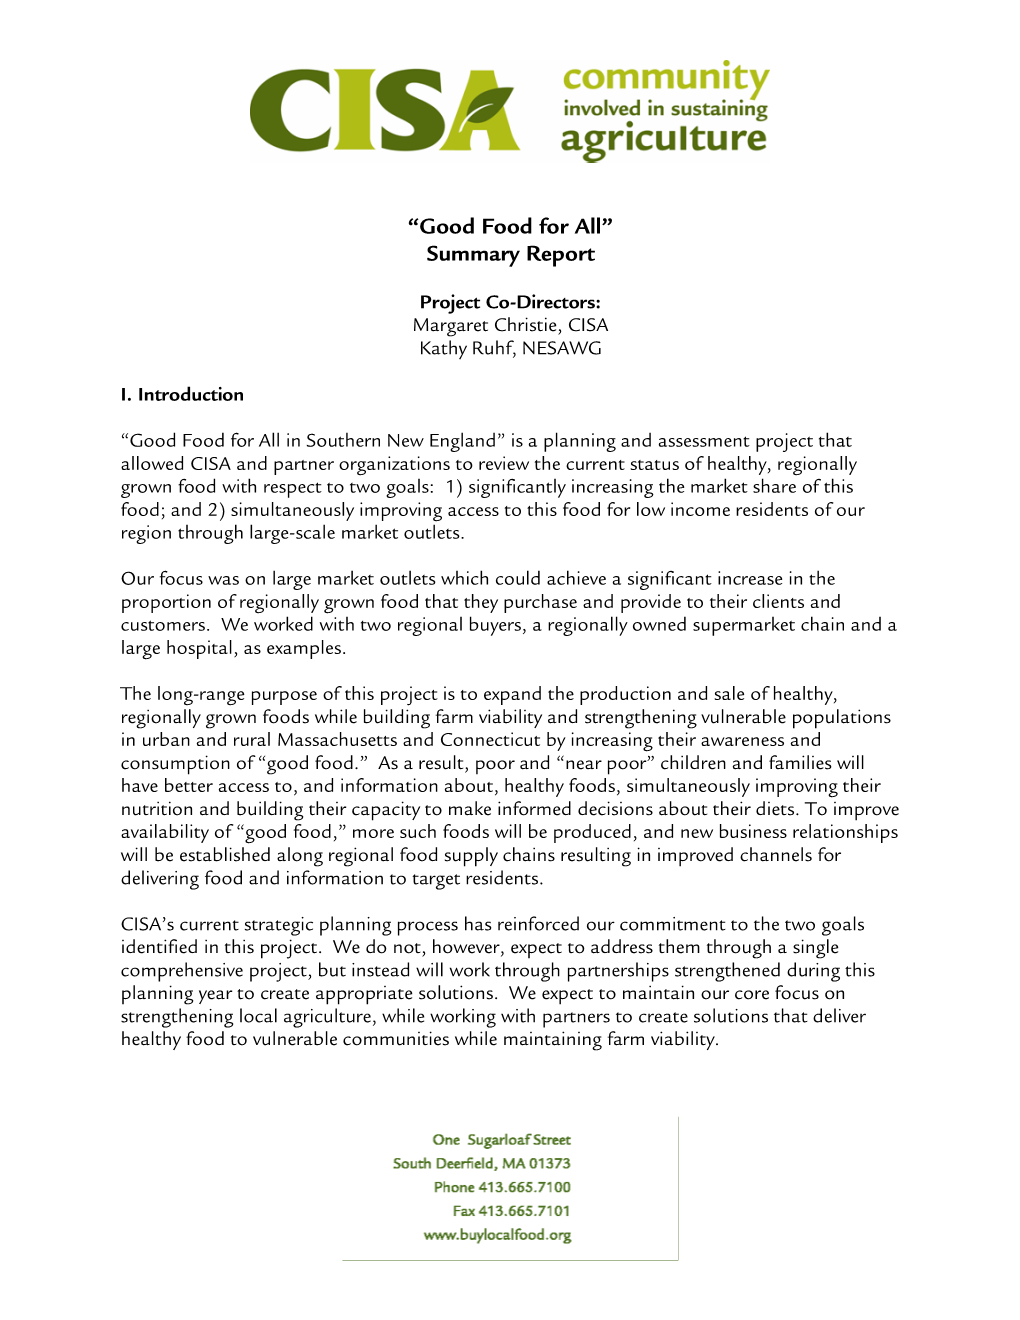 “Good Food for All” Summary Report